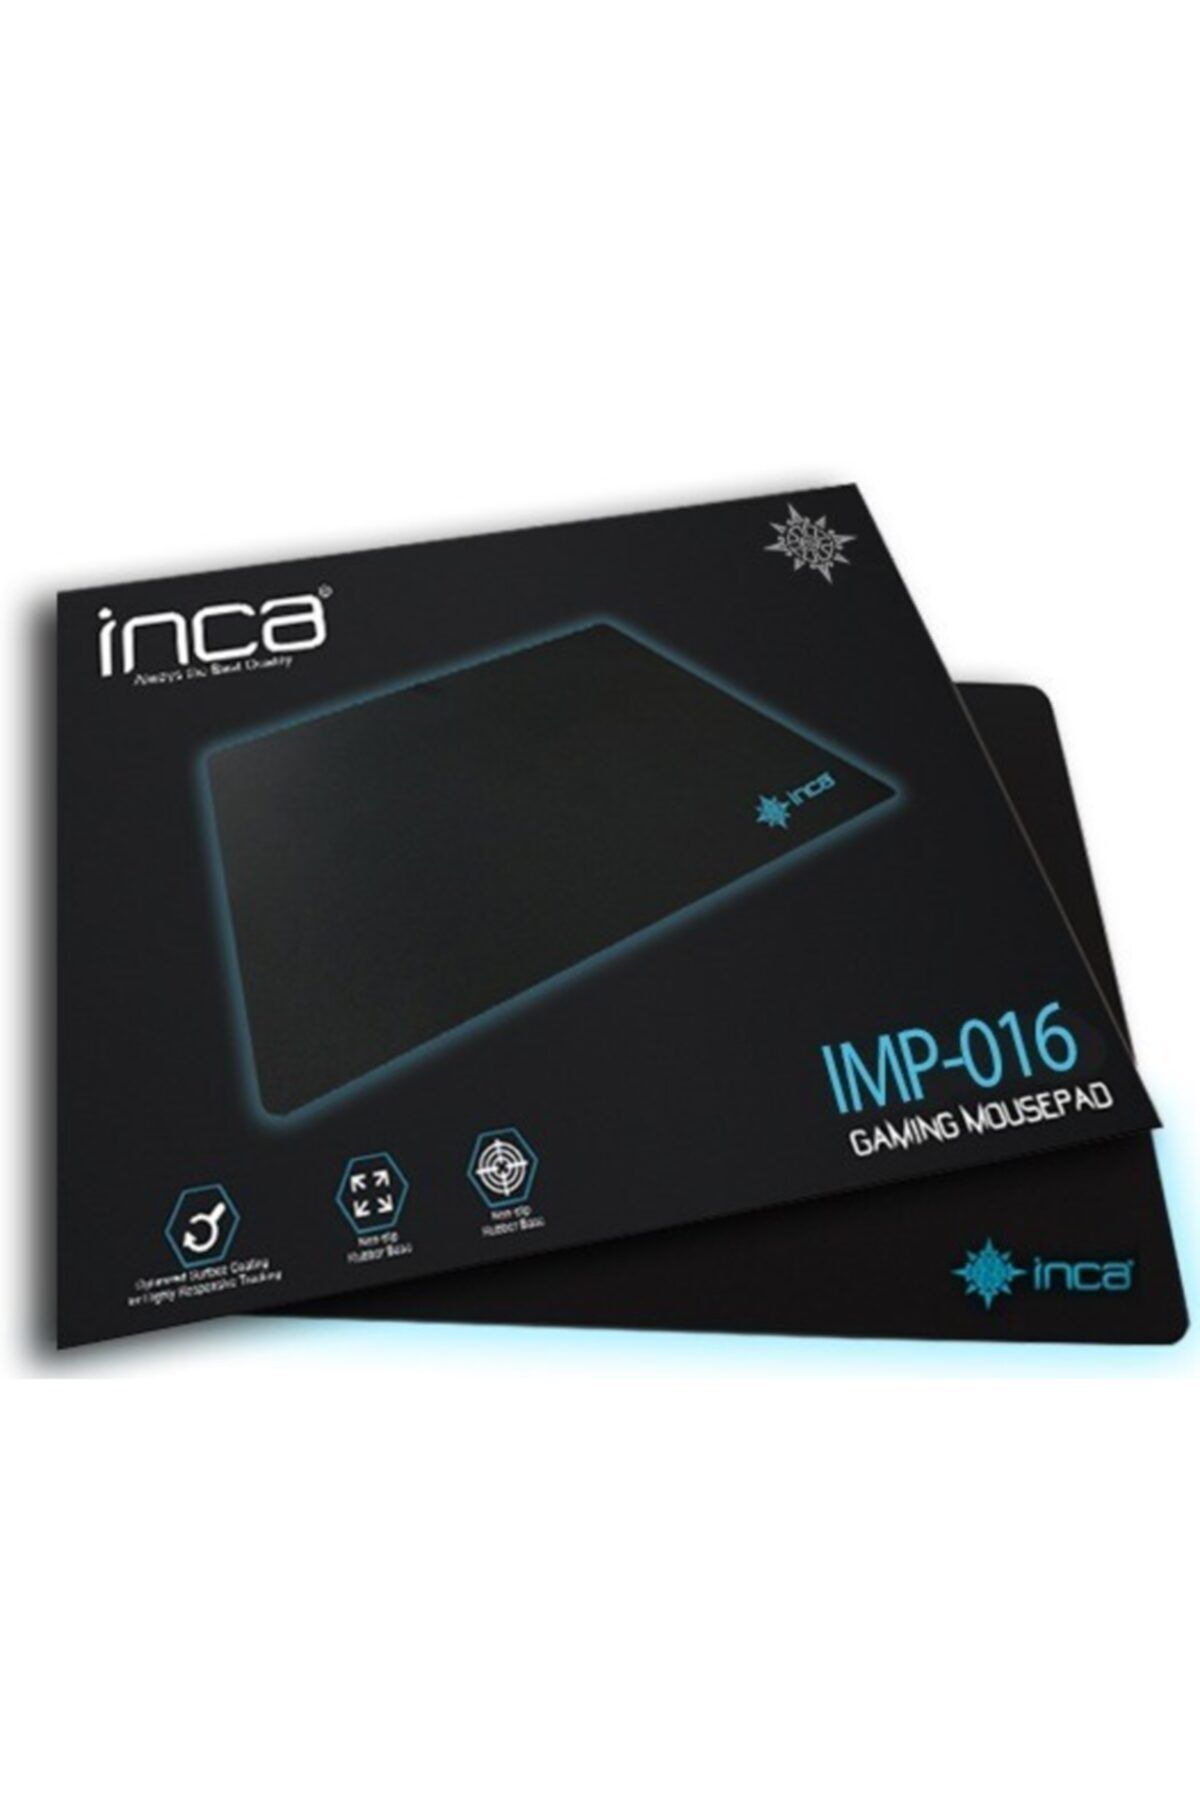 Inca 220x290x3mm Small Gaming Mouse Pad Imp-016